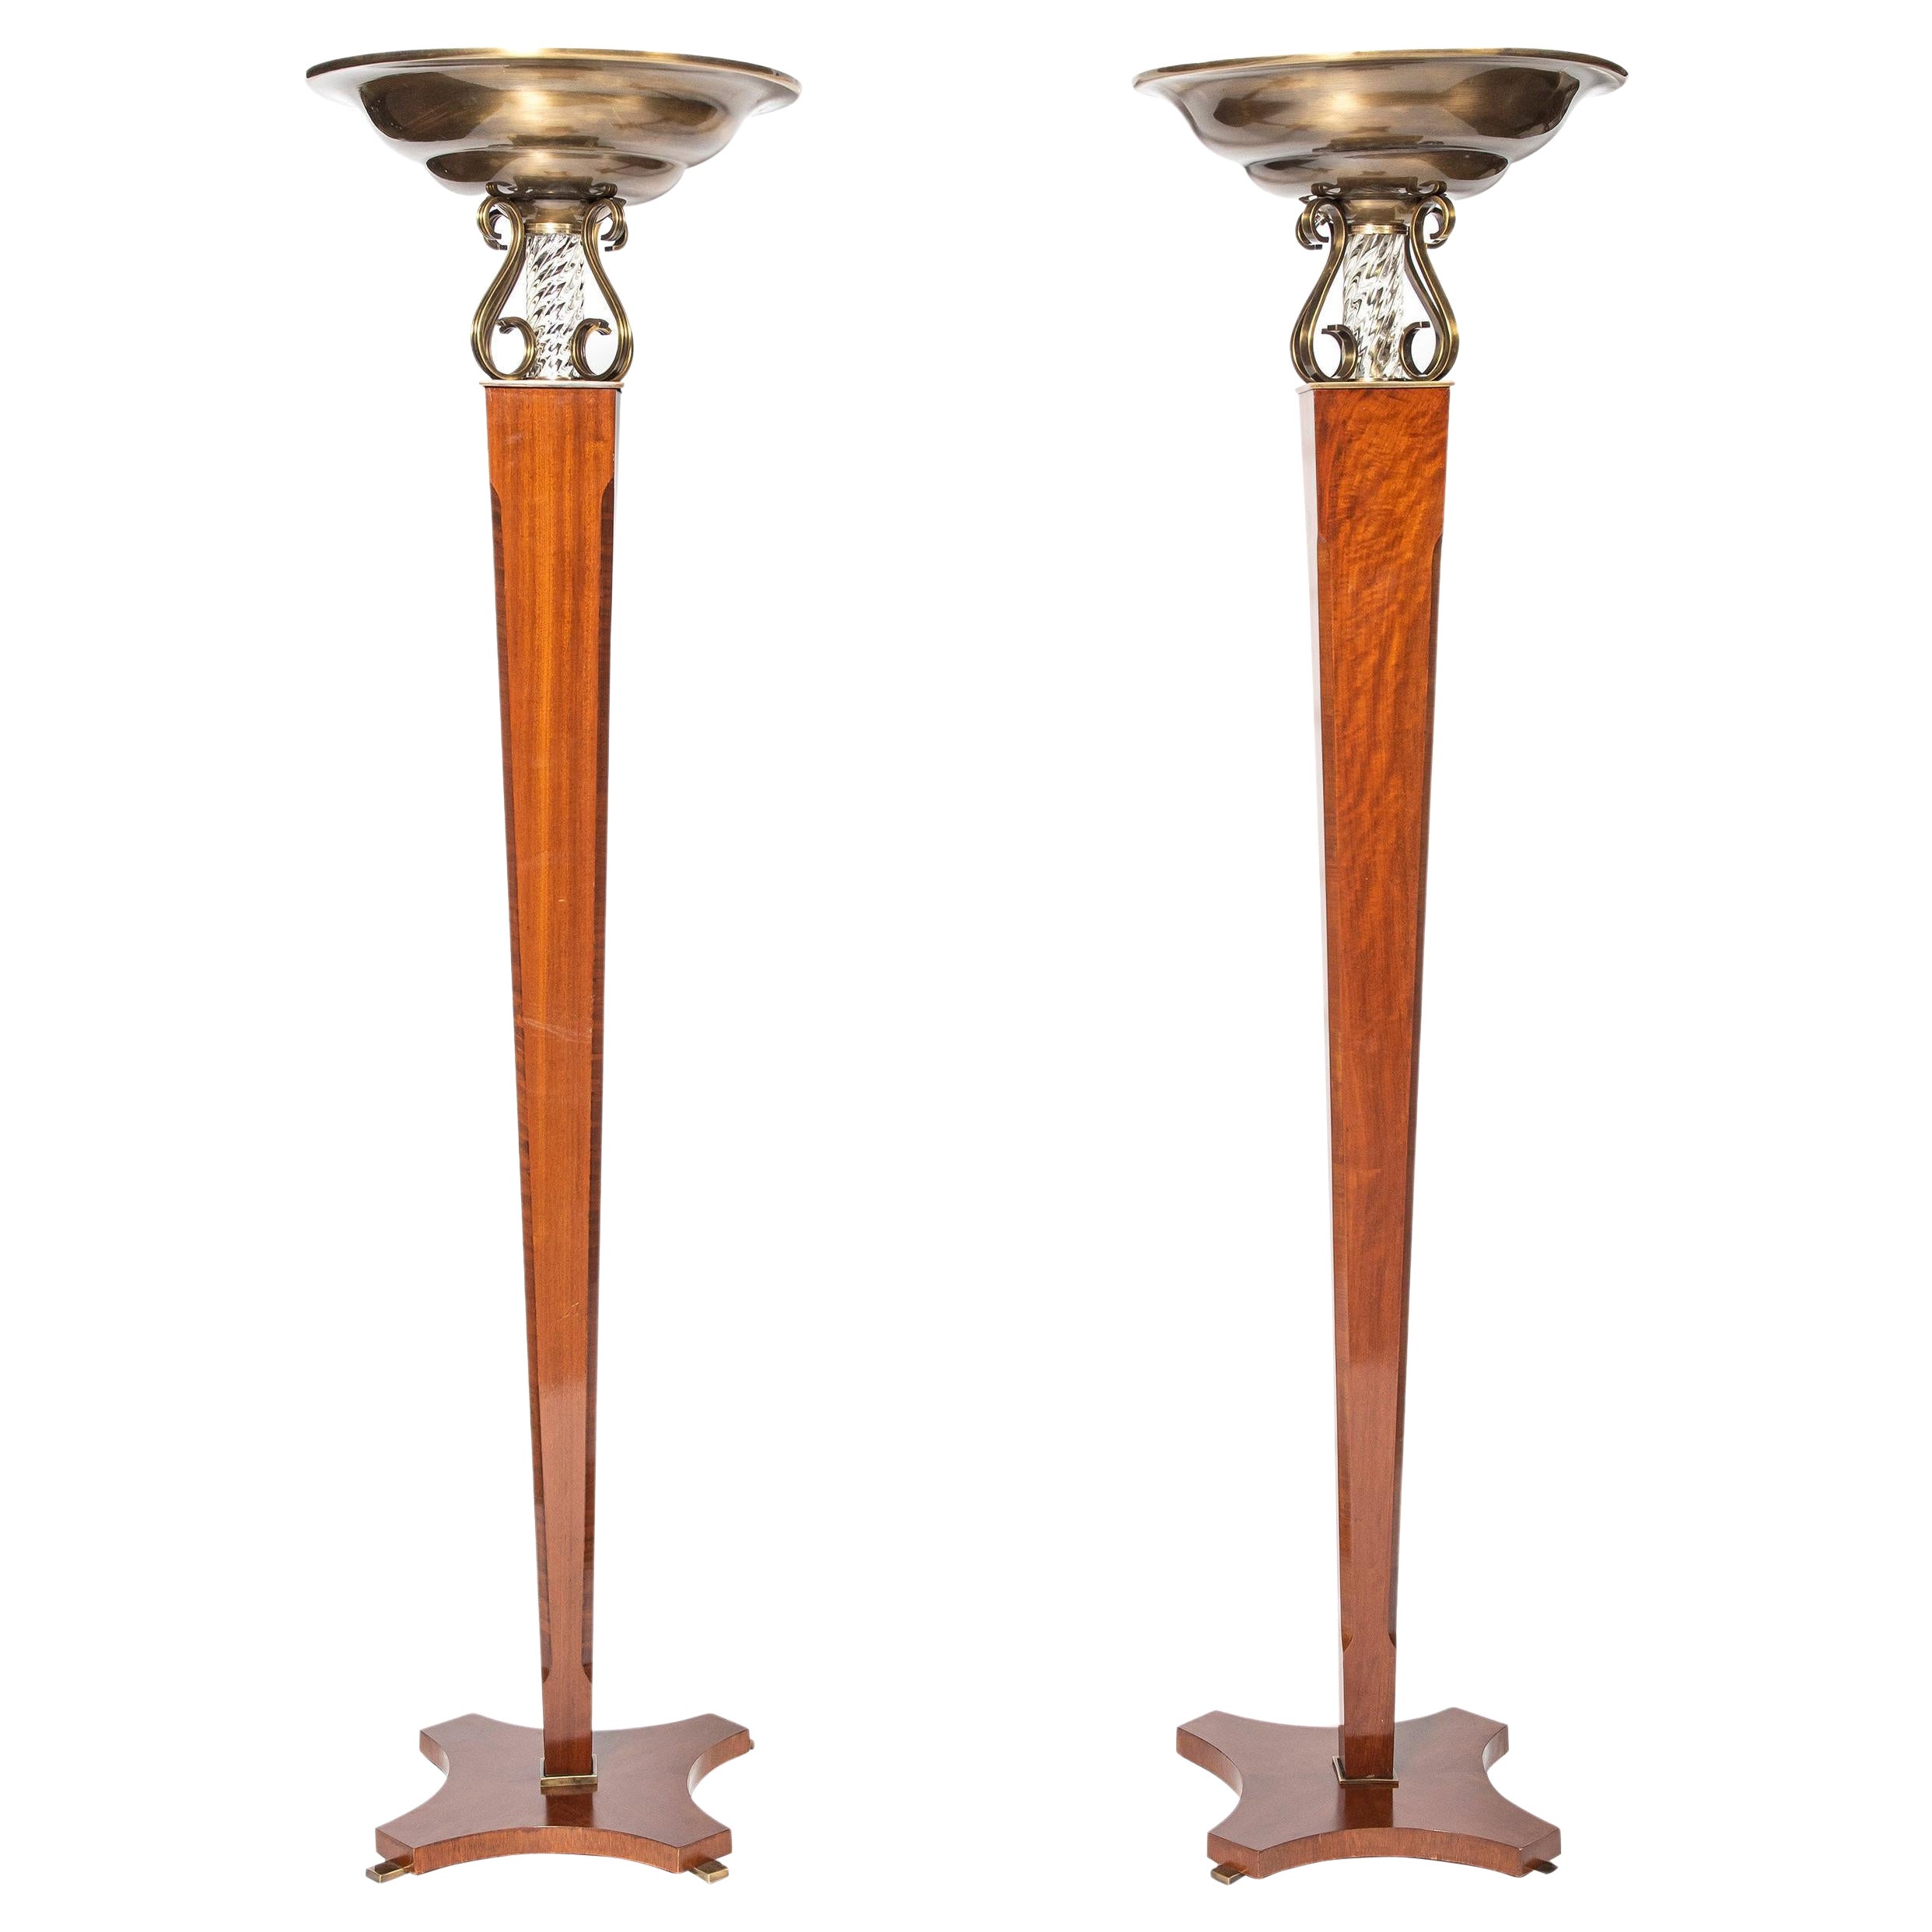 Pair of Wood, Bronze and Glass Floor Lamps, Argentina circa 1950